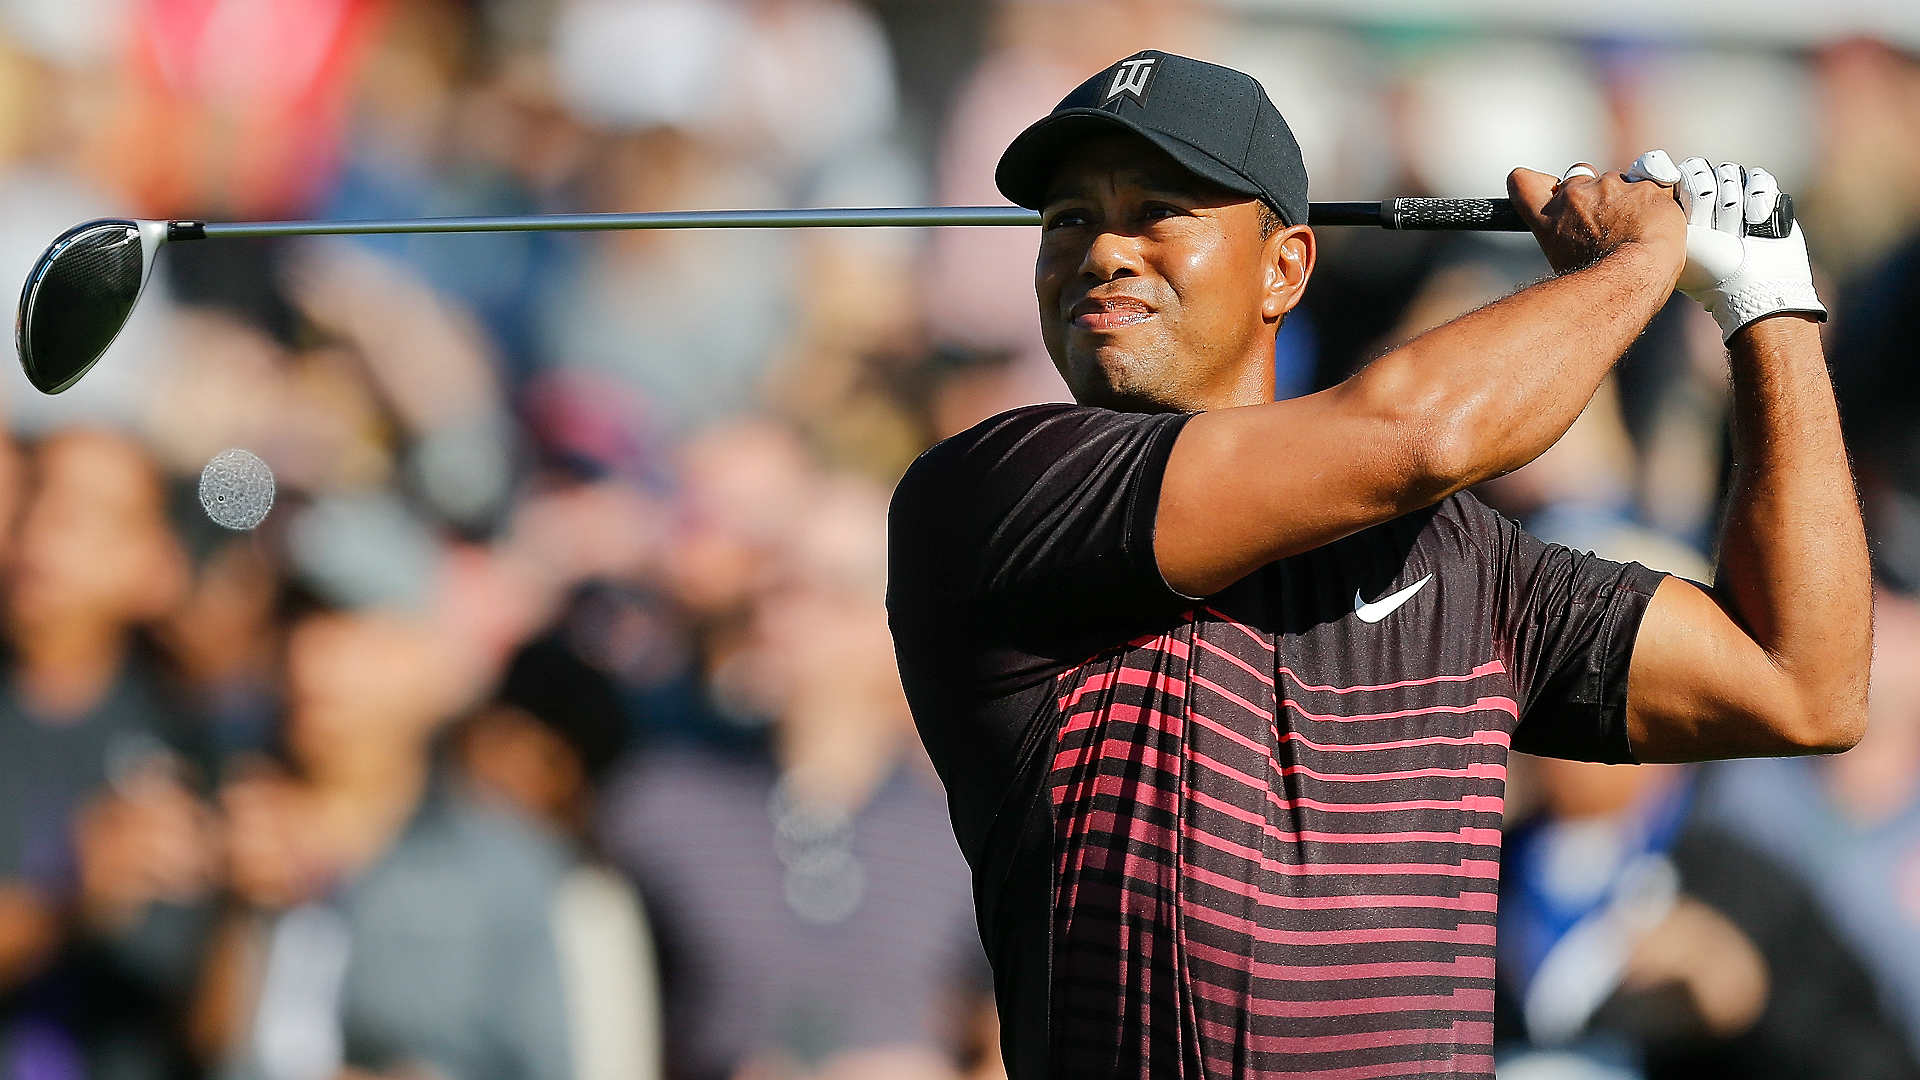 Tee times for Tiger Woods, rest of field at 2018 Farmers Insurance